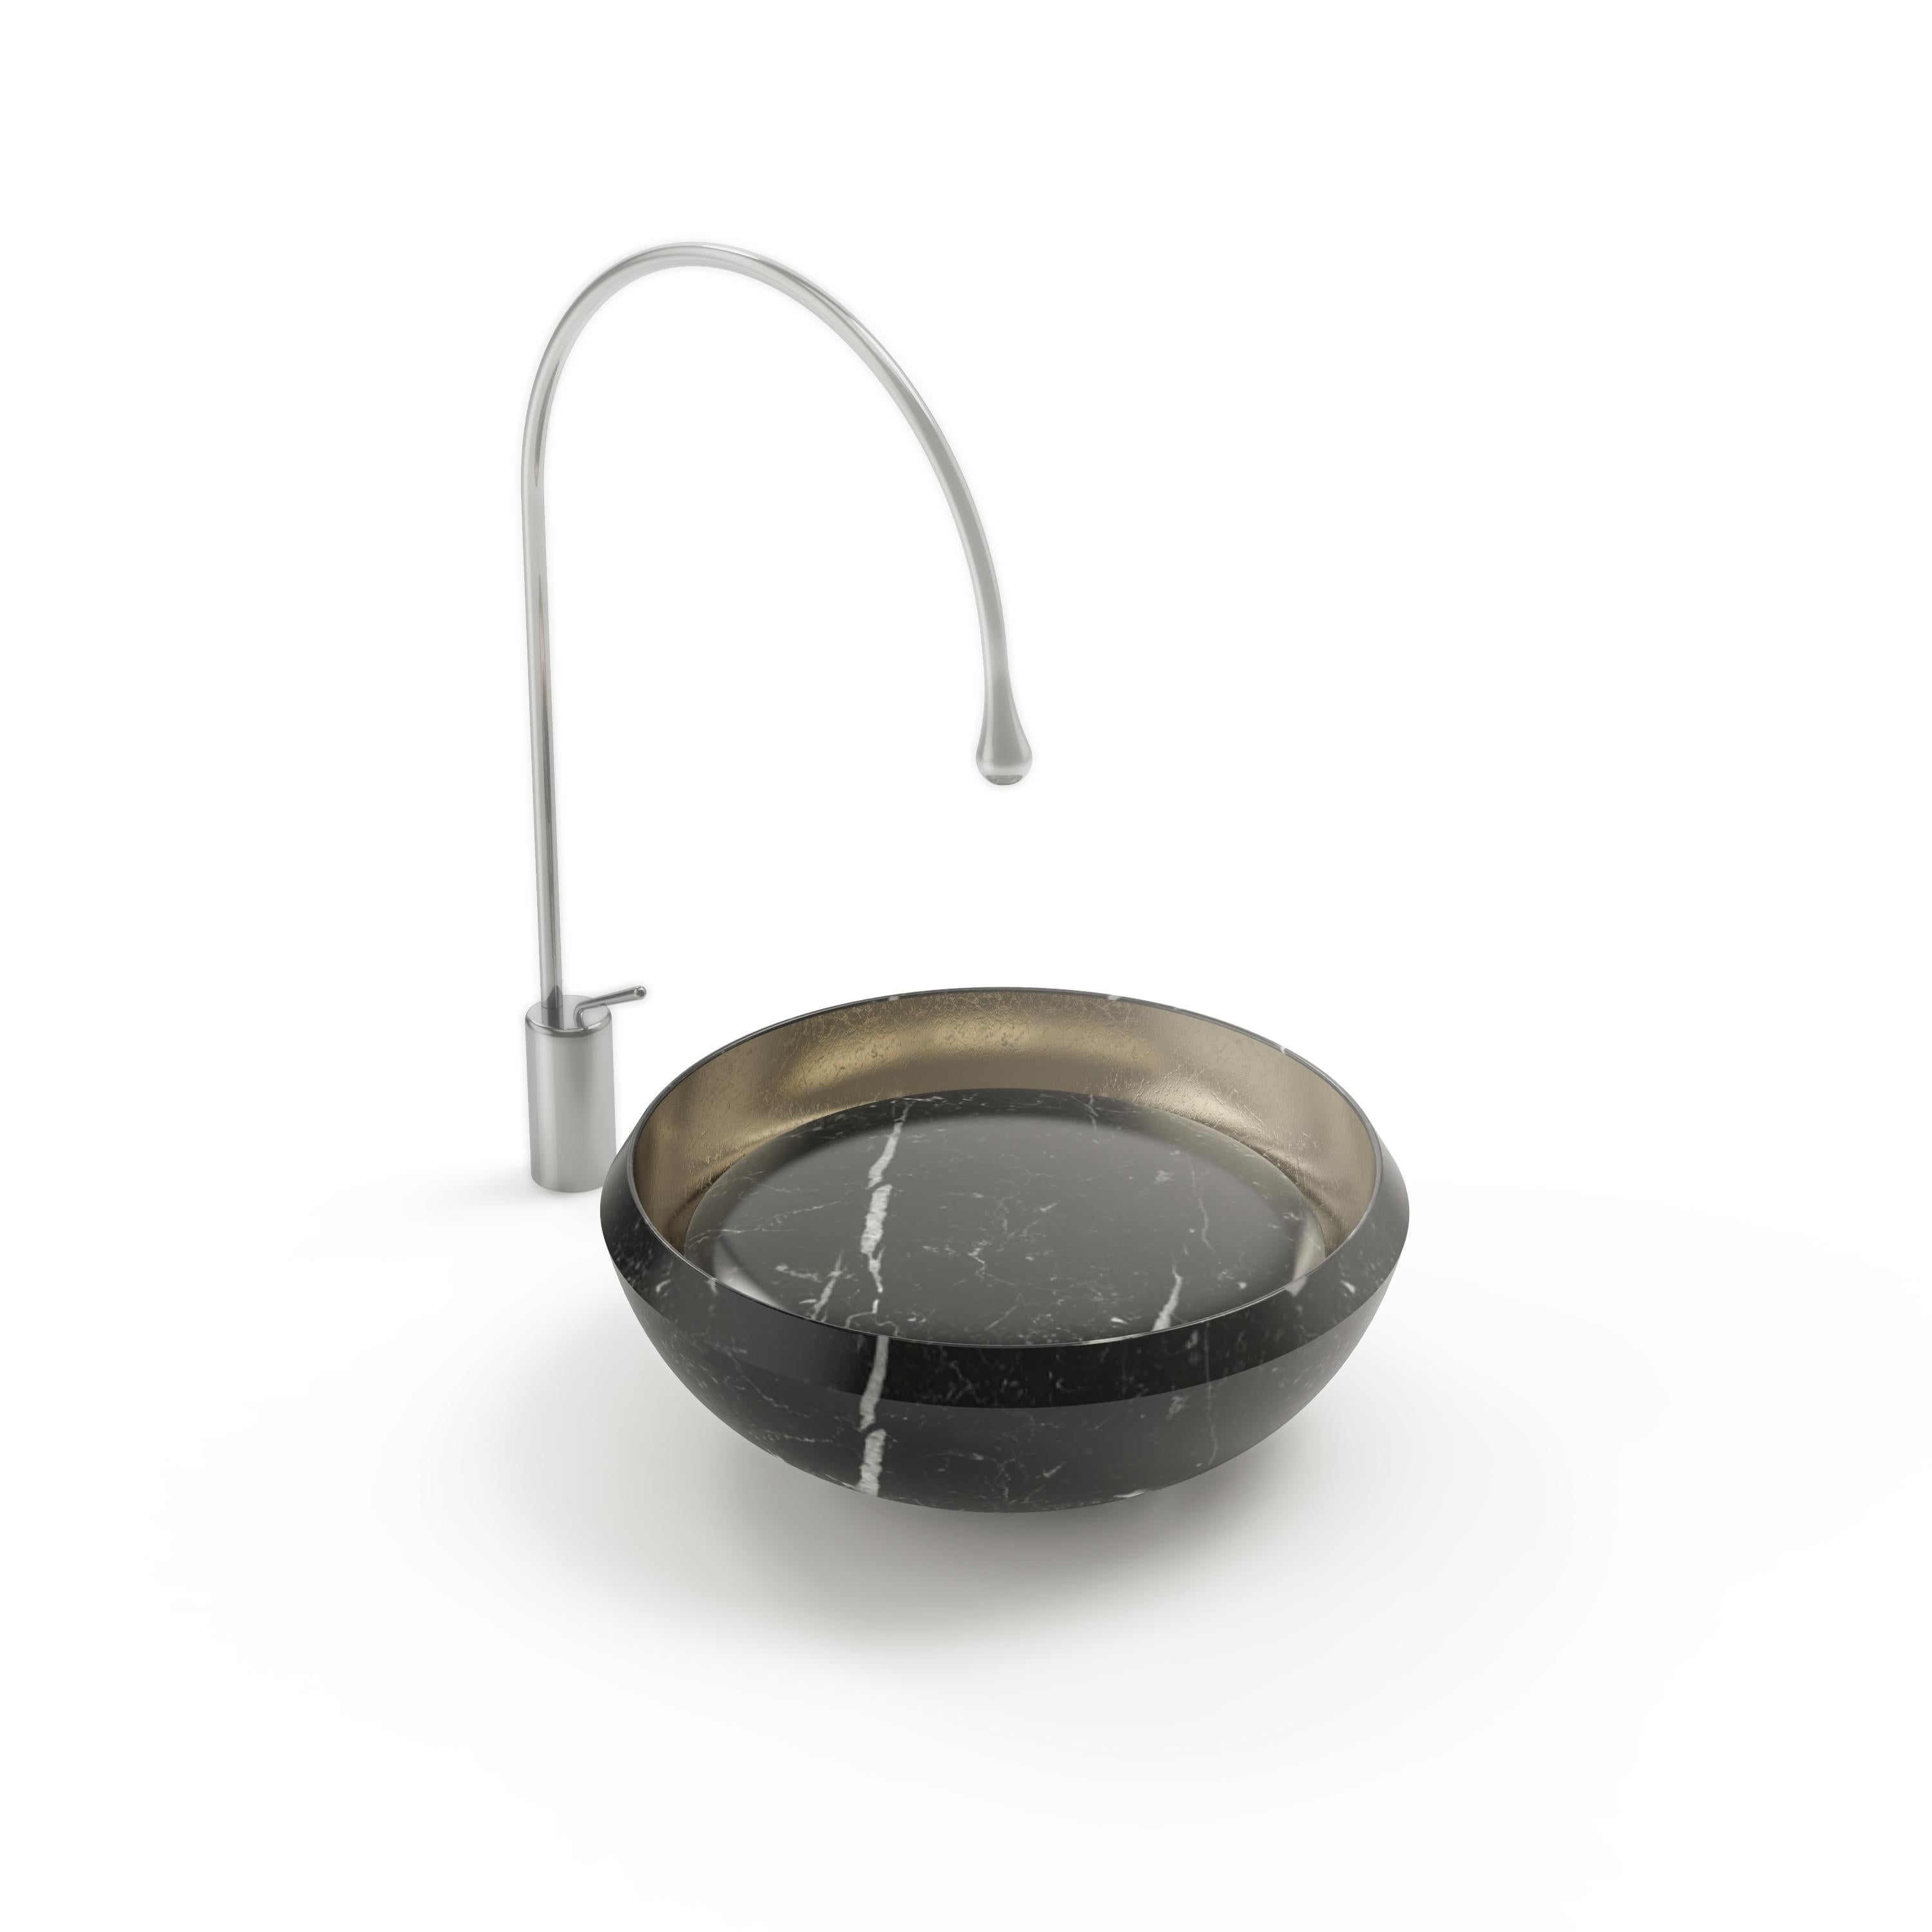 Eclissi washbasin by Marmi Serafini
Materials: Nero Marquinia marble, Gold Leaf.
Dimensions: D 47 x H 16 cm
Available in other marbles.
Tap not included.

As the sun, obscured by the moon during an eclipse, reveals an awe-striking fiery rim of